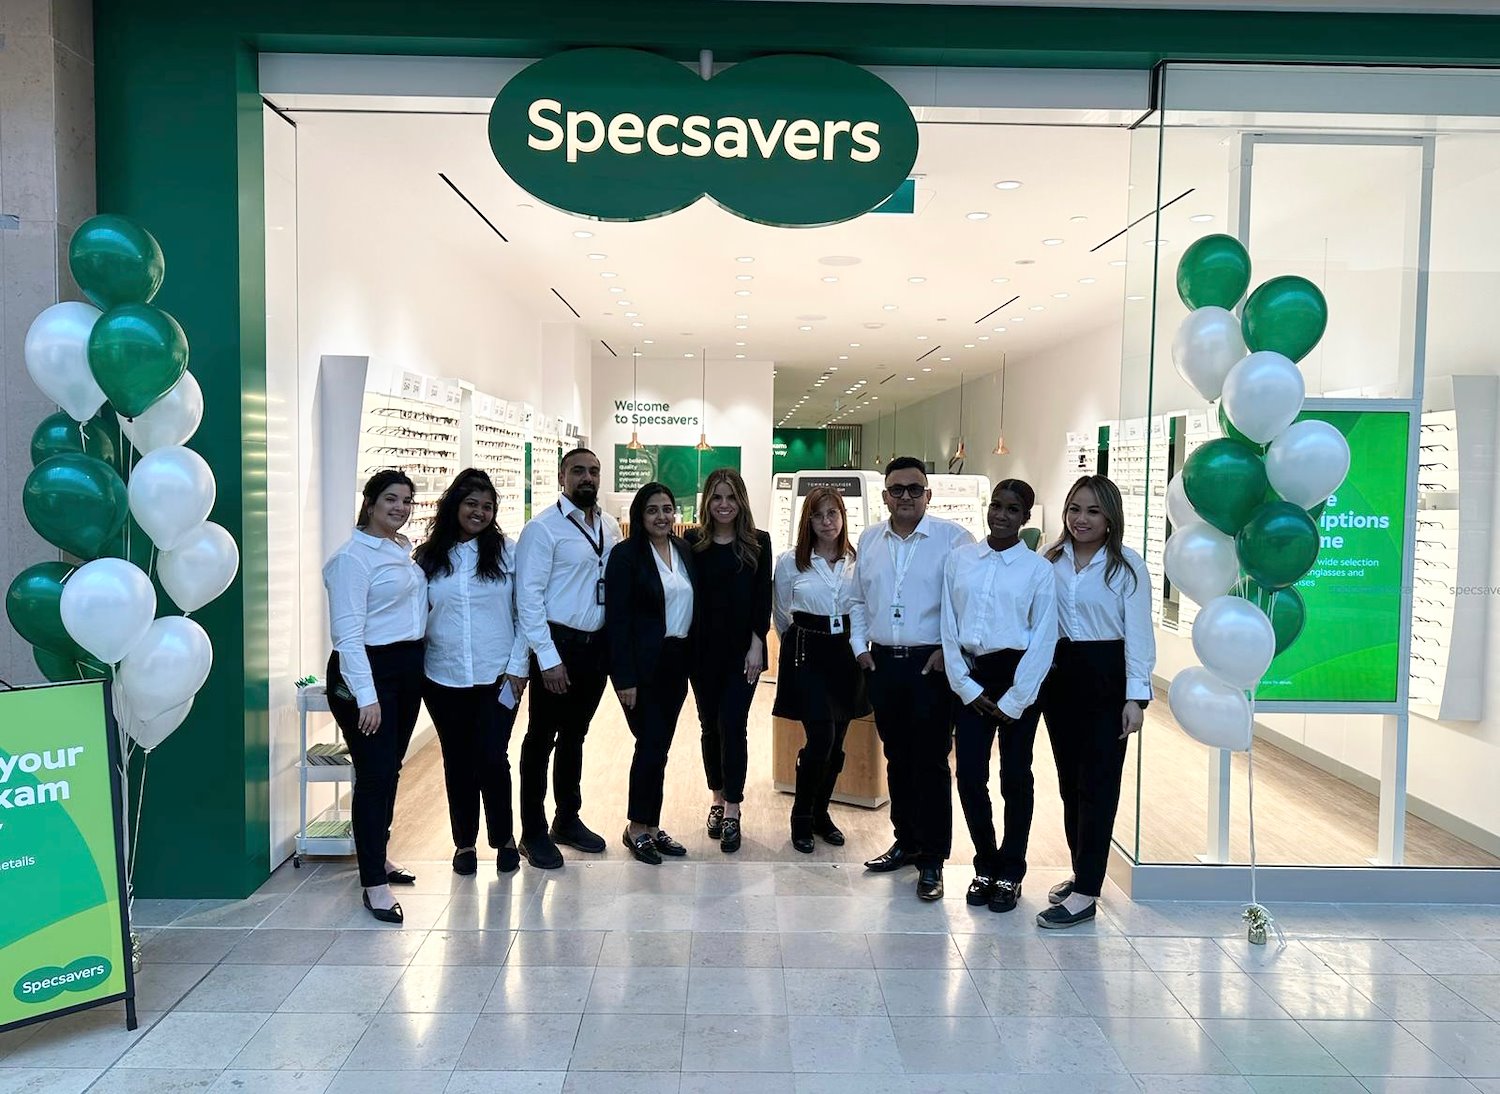 Images Specsavers Sherway Gardens